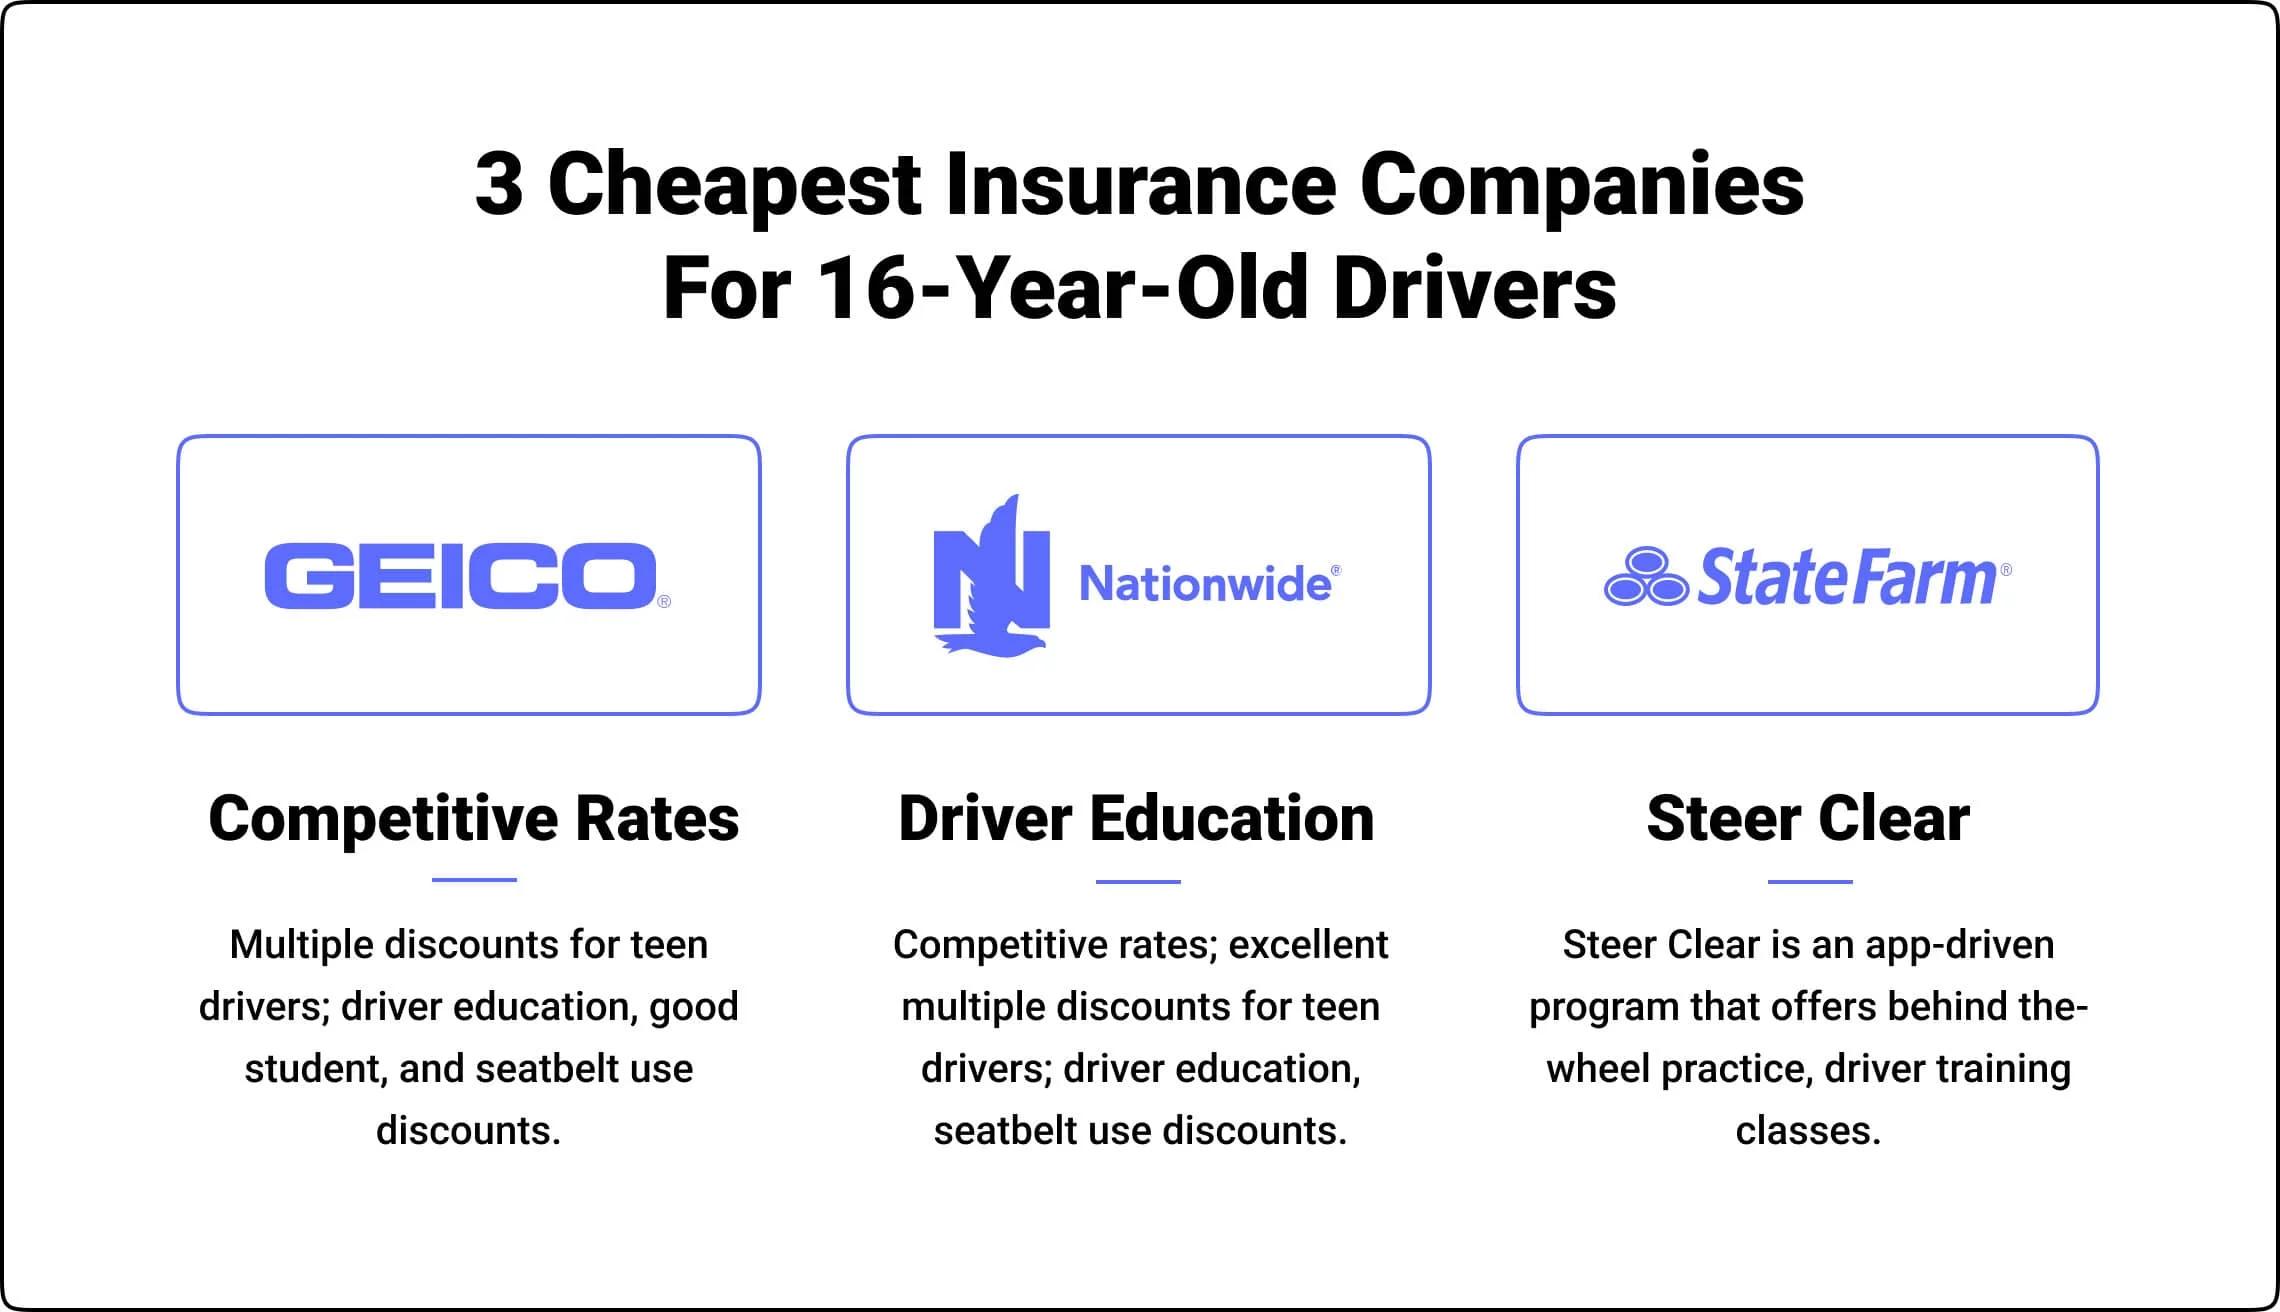 Cheapest car insurance companies for 16-year-olds.